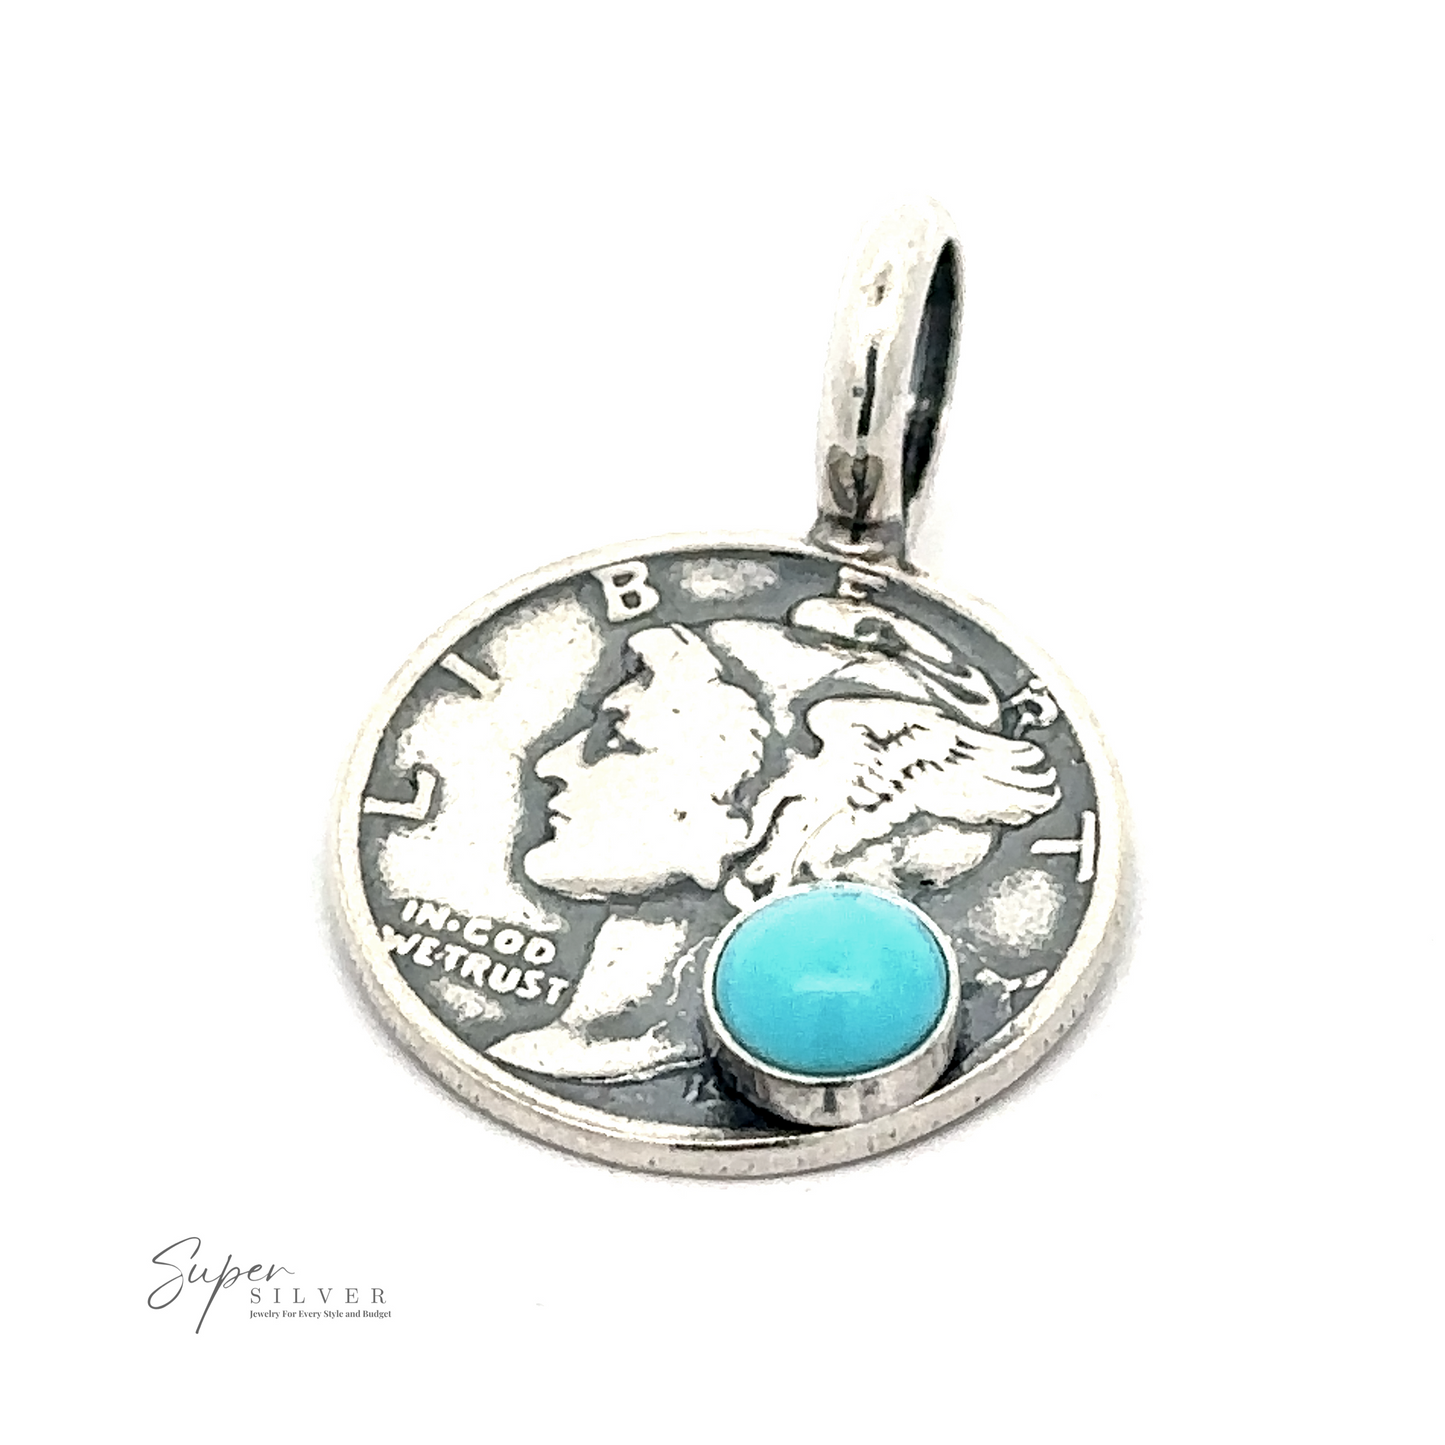 
                  
                    A silver pendant featuring a vintage coin with the word "LIBERTY" and a head profile. It has a round turquoise stone set in a small circular bezel at the bottom of the coin. This exquisite piece of handmade Dime Pendant With A Round Turquoise reads "Super Silver.
                  
                